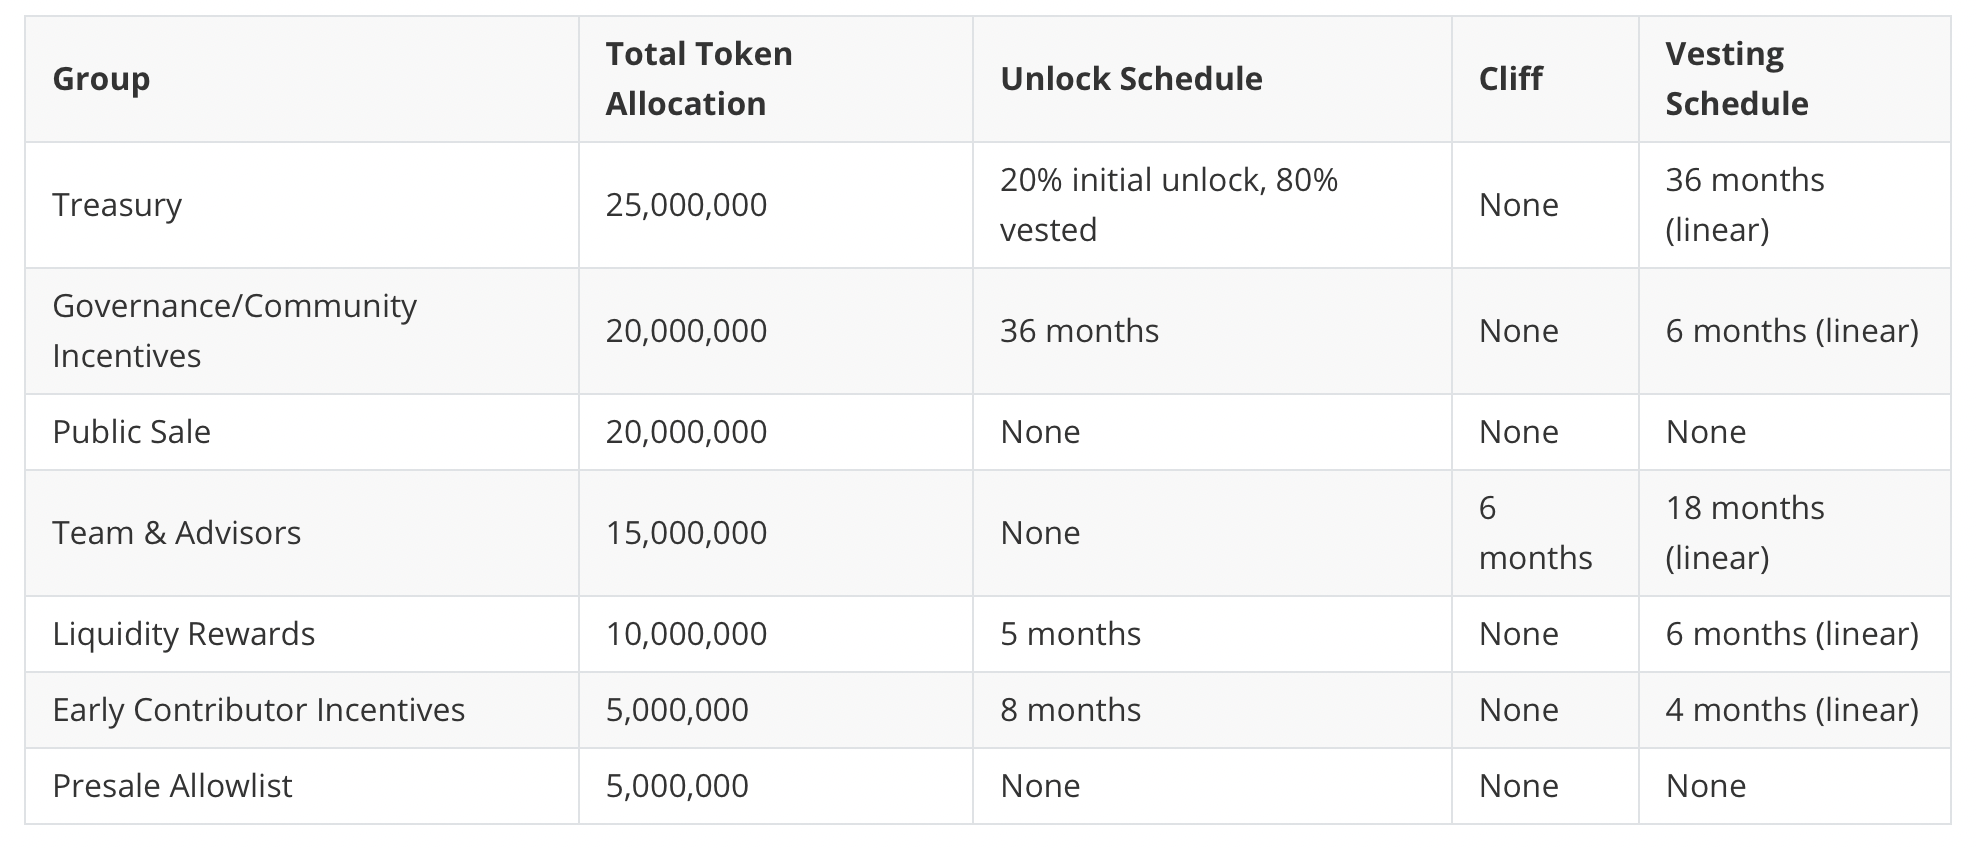 More supply will be locked up than indicated in the emissions schedule, as time-locked staking rewards have an additional 6 month linear vest on bonus rewards. We have chosen to be conservative in the emission schedule to build trust.